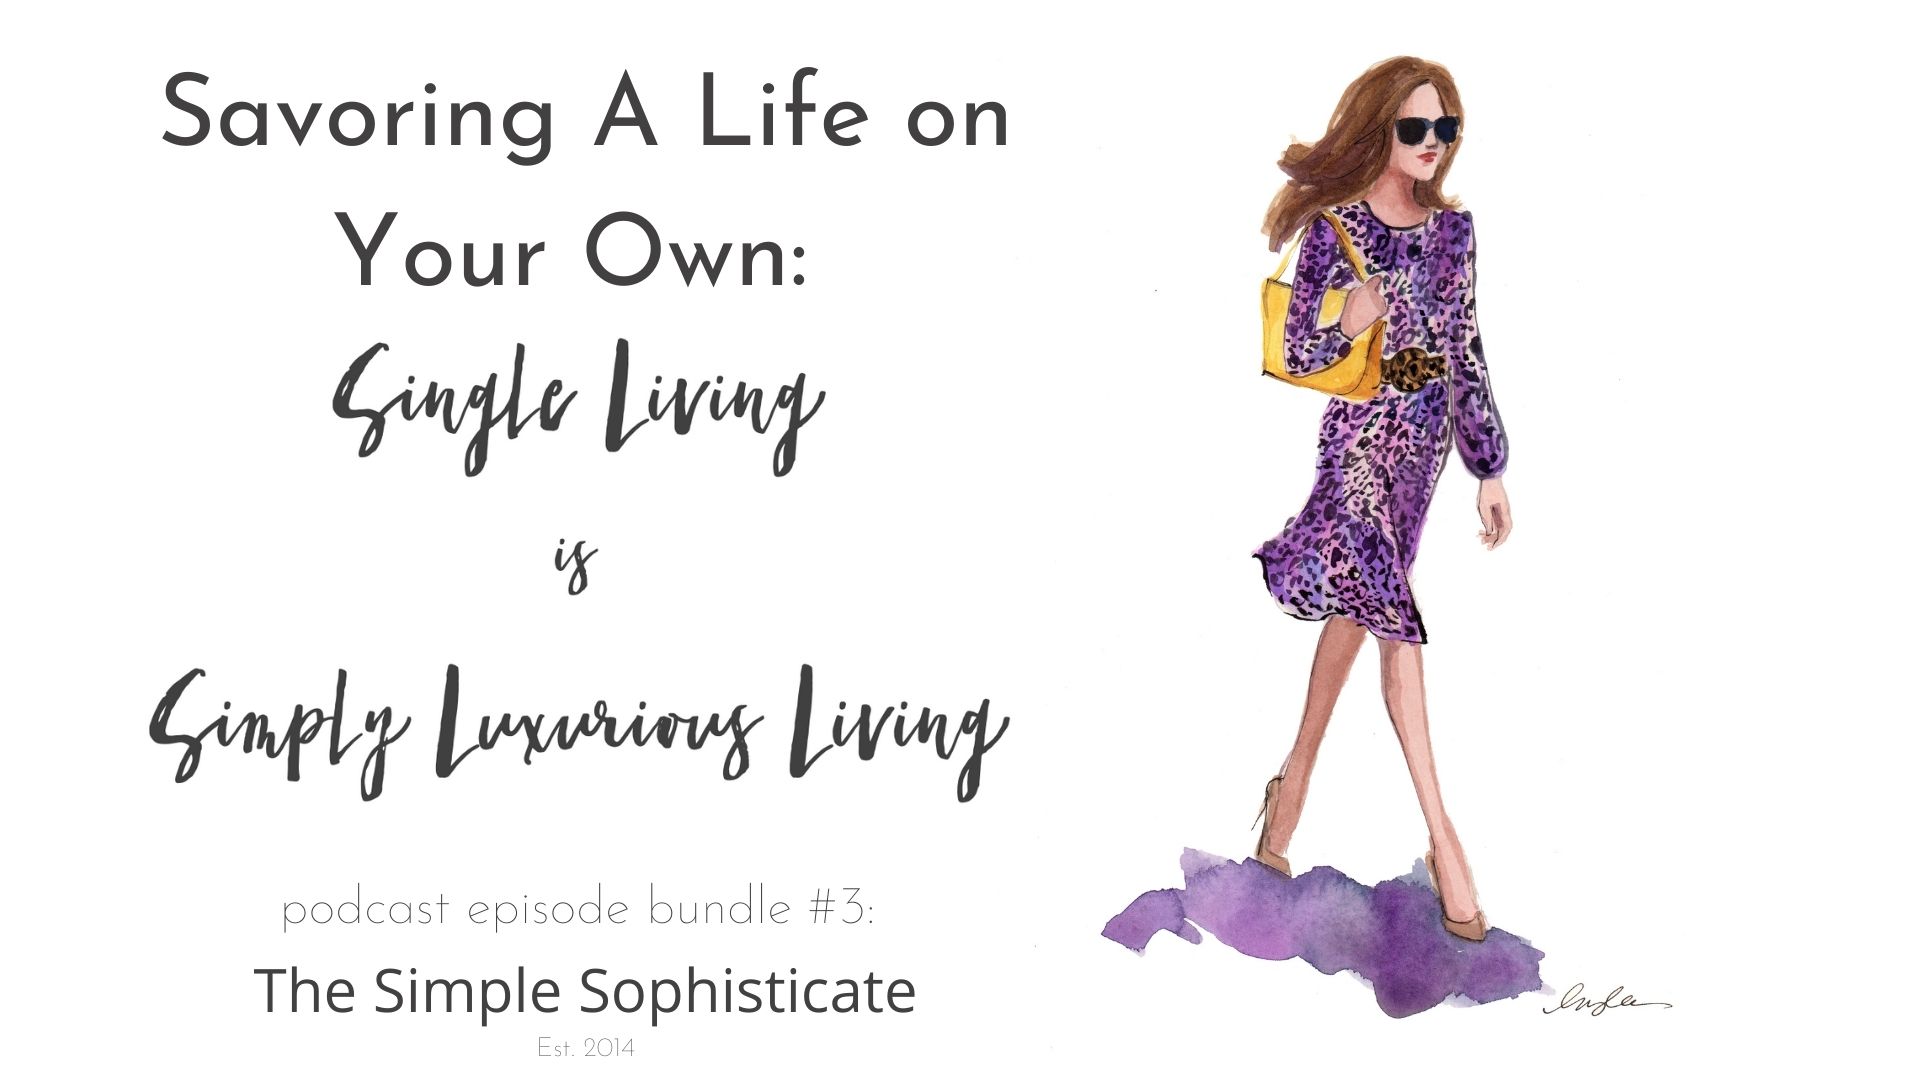 Savoring A Life On Your Own: podcast bundle #3